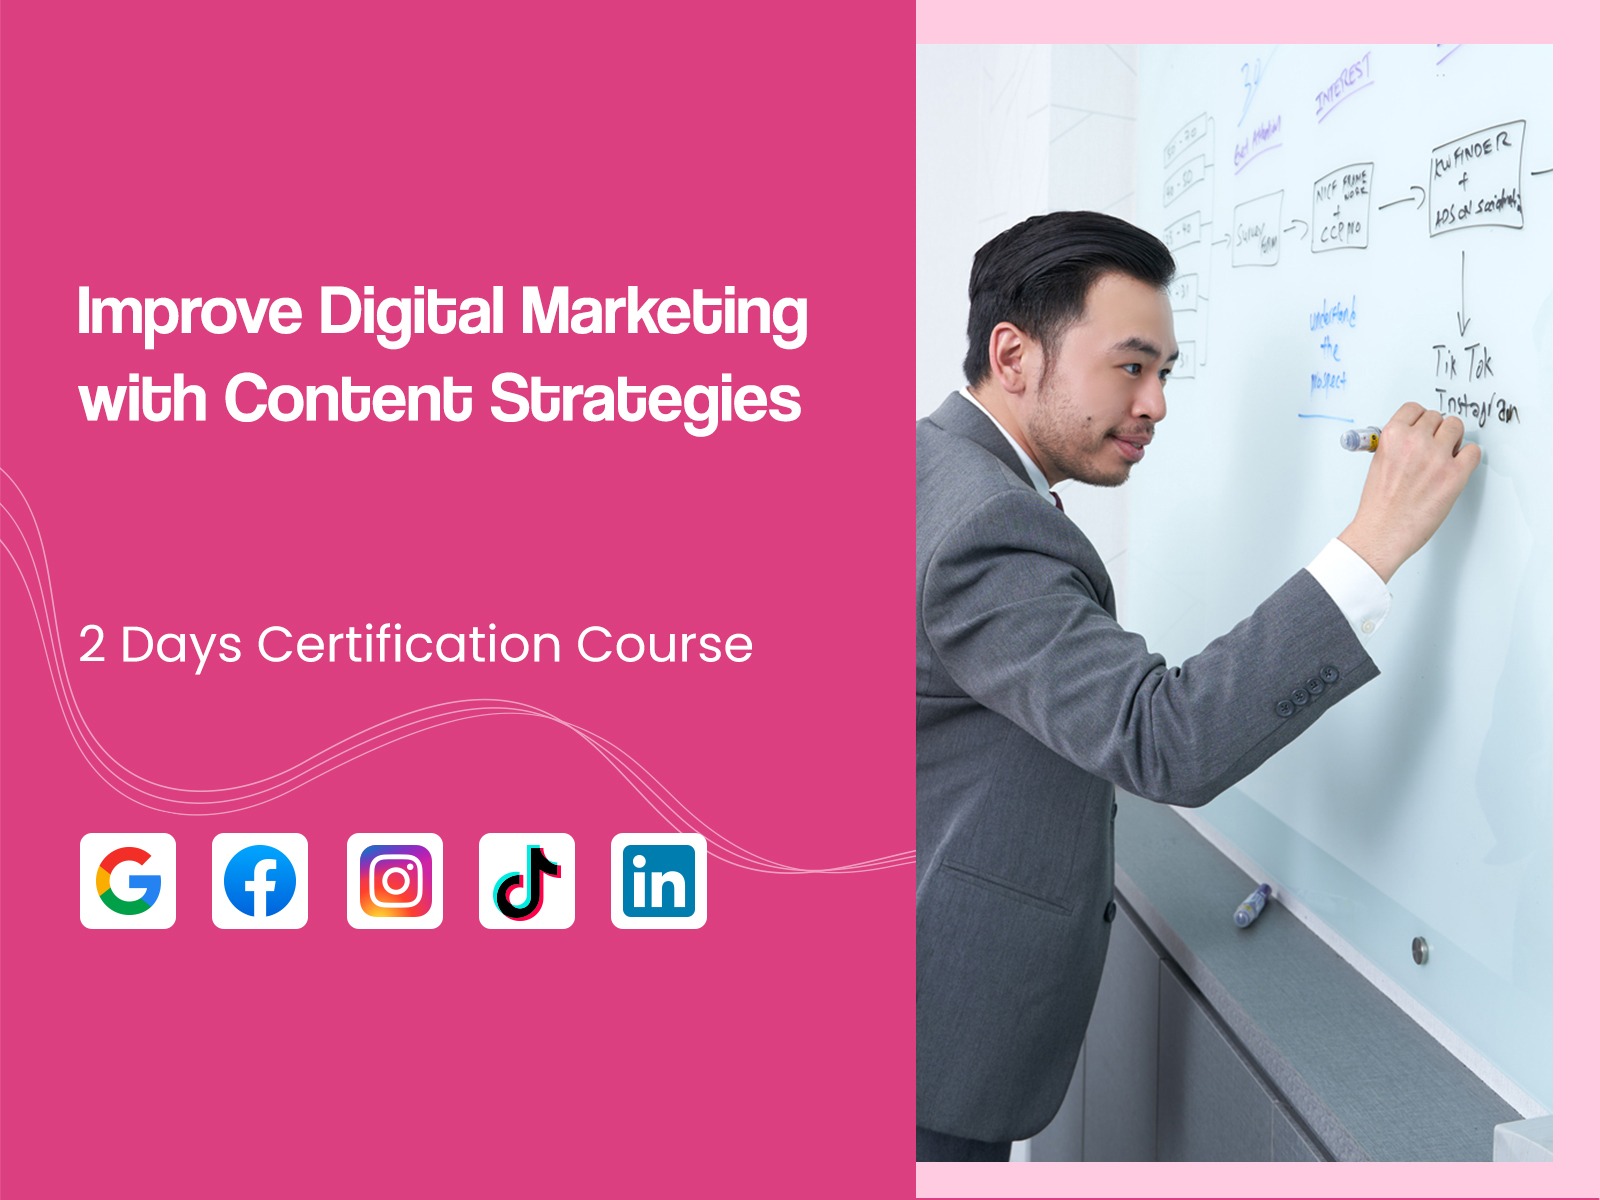 Improve Digital Marketing with Content Strategies course in Singapore